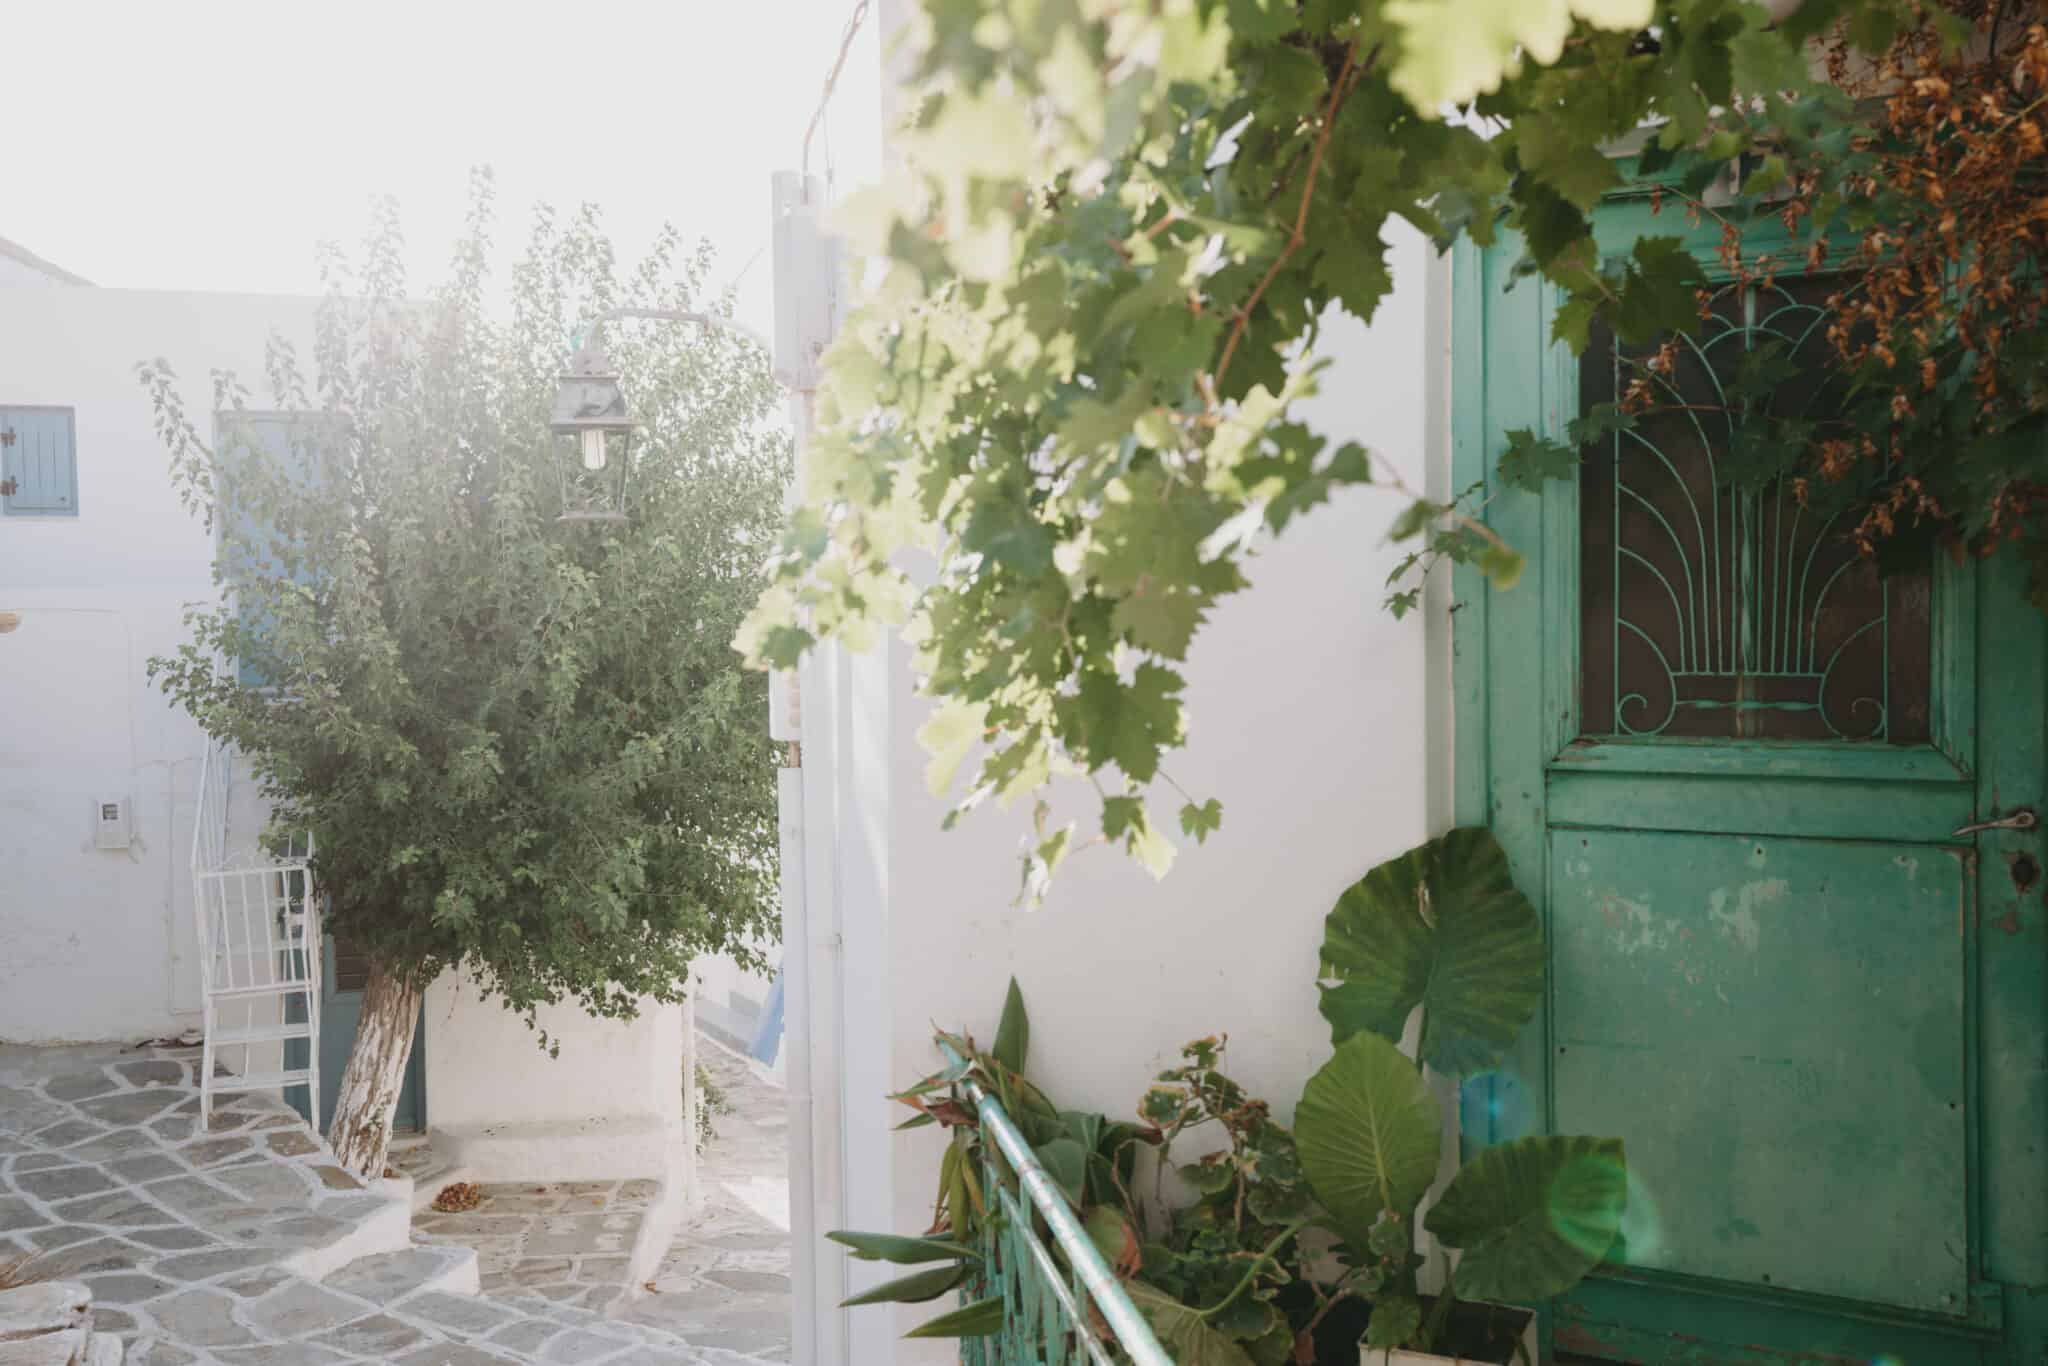 An alleyway with a green door and plants on Paros Island.